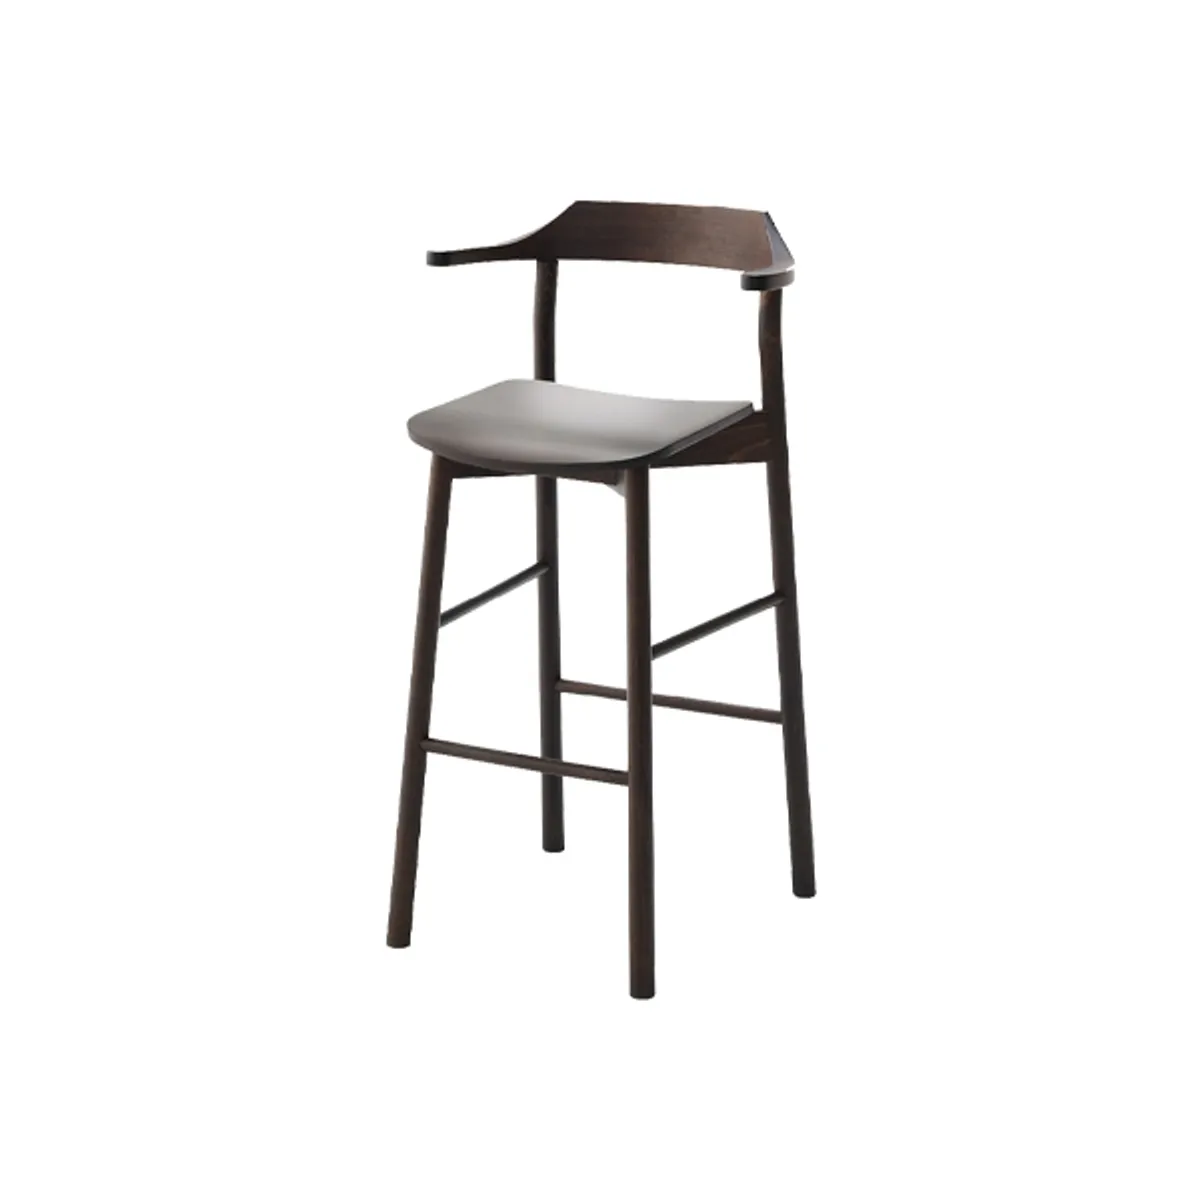 Yumi bar stool with arms Inside Out Contracts4